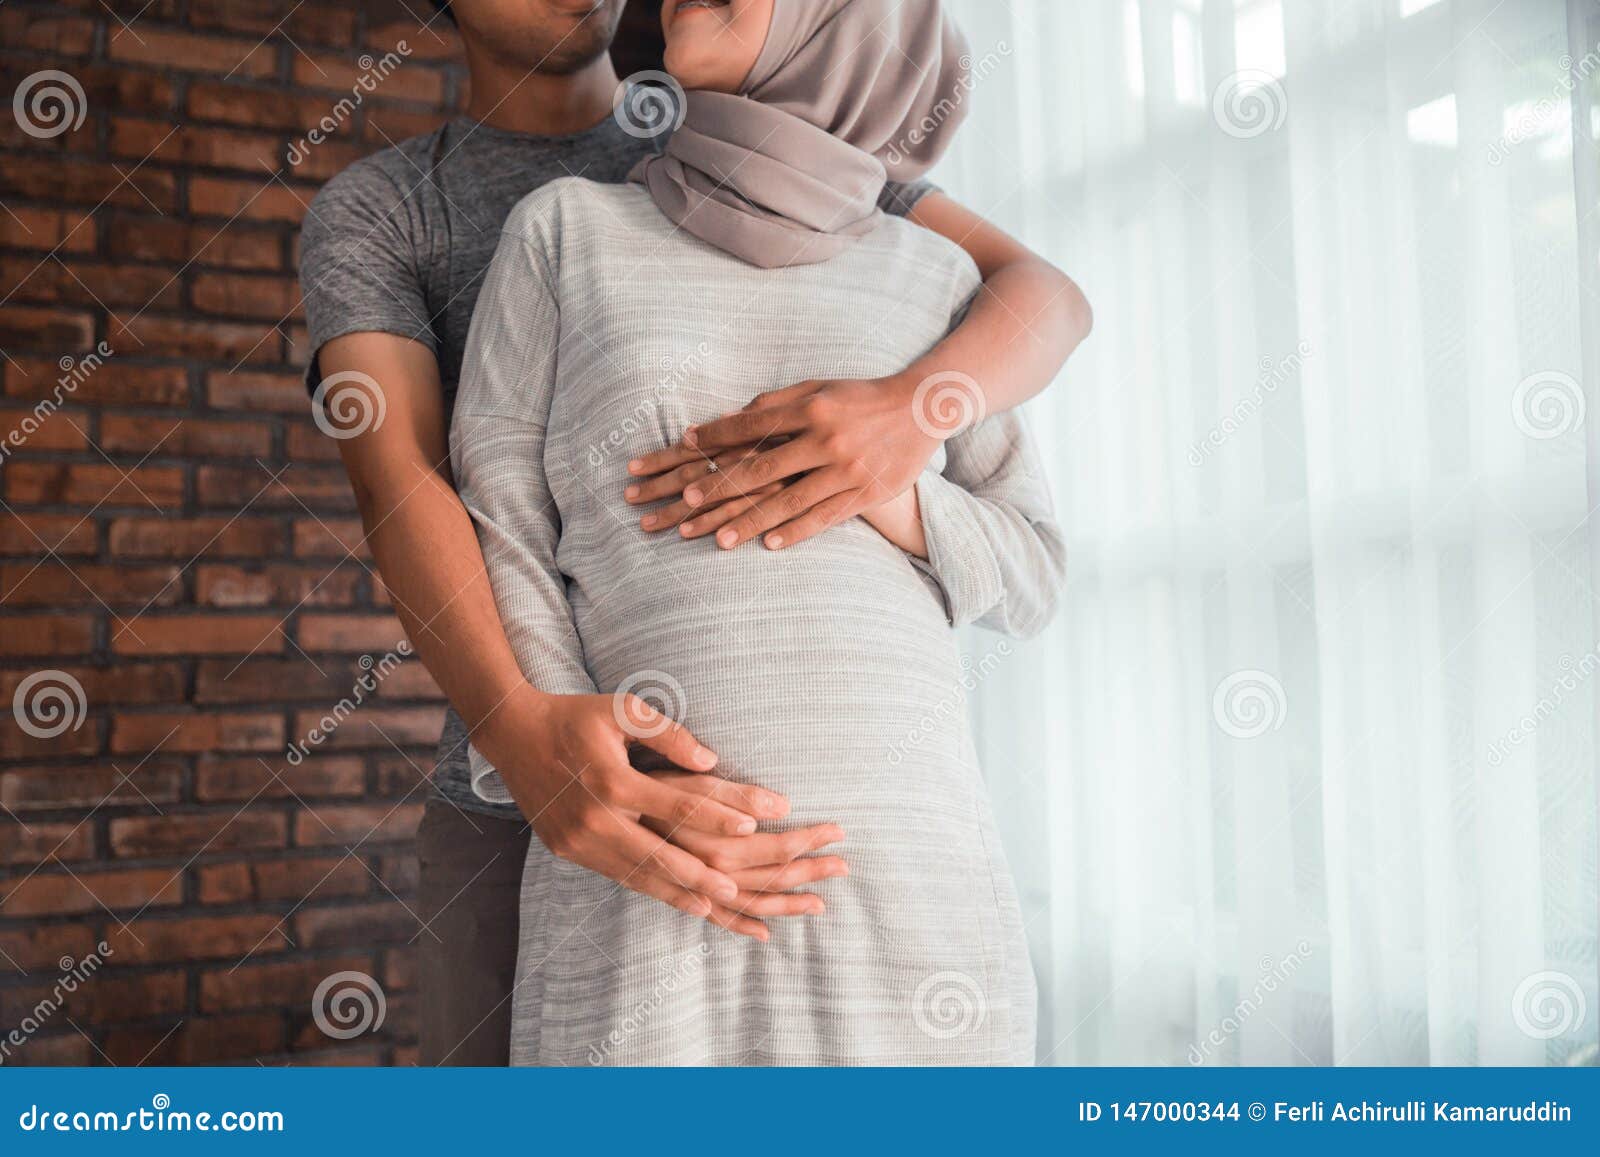 Pregnancy Muslim Woman with Husband Stock Photo - Image of family ...